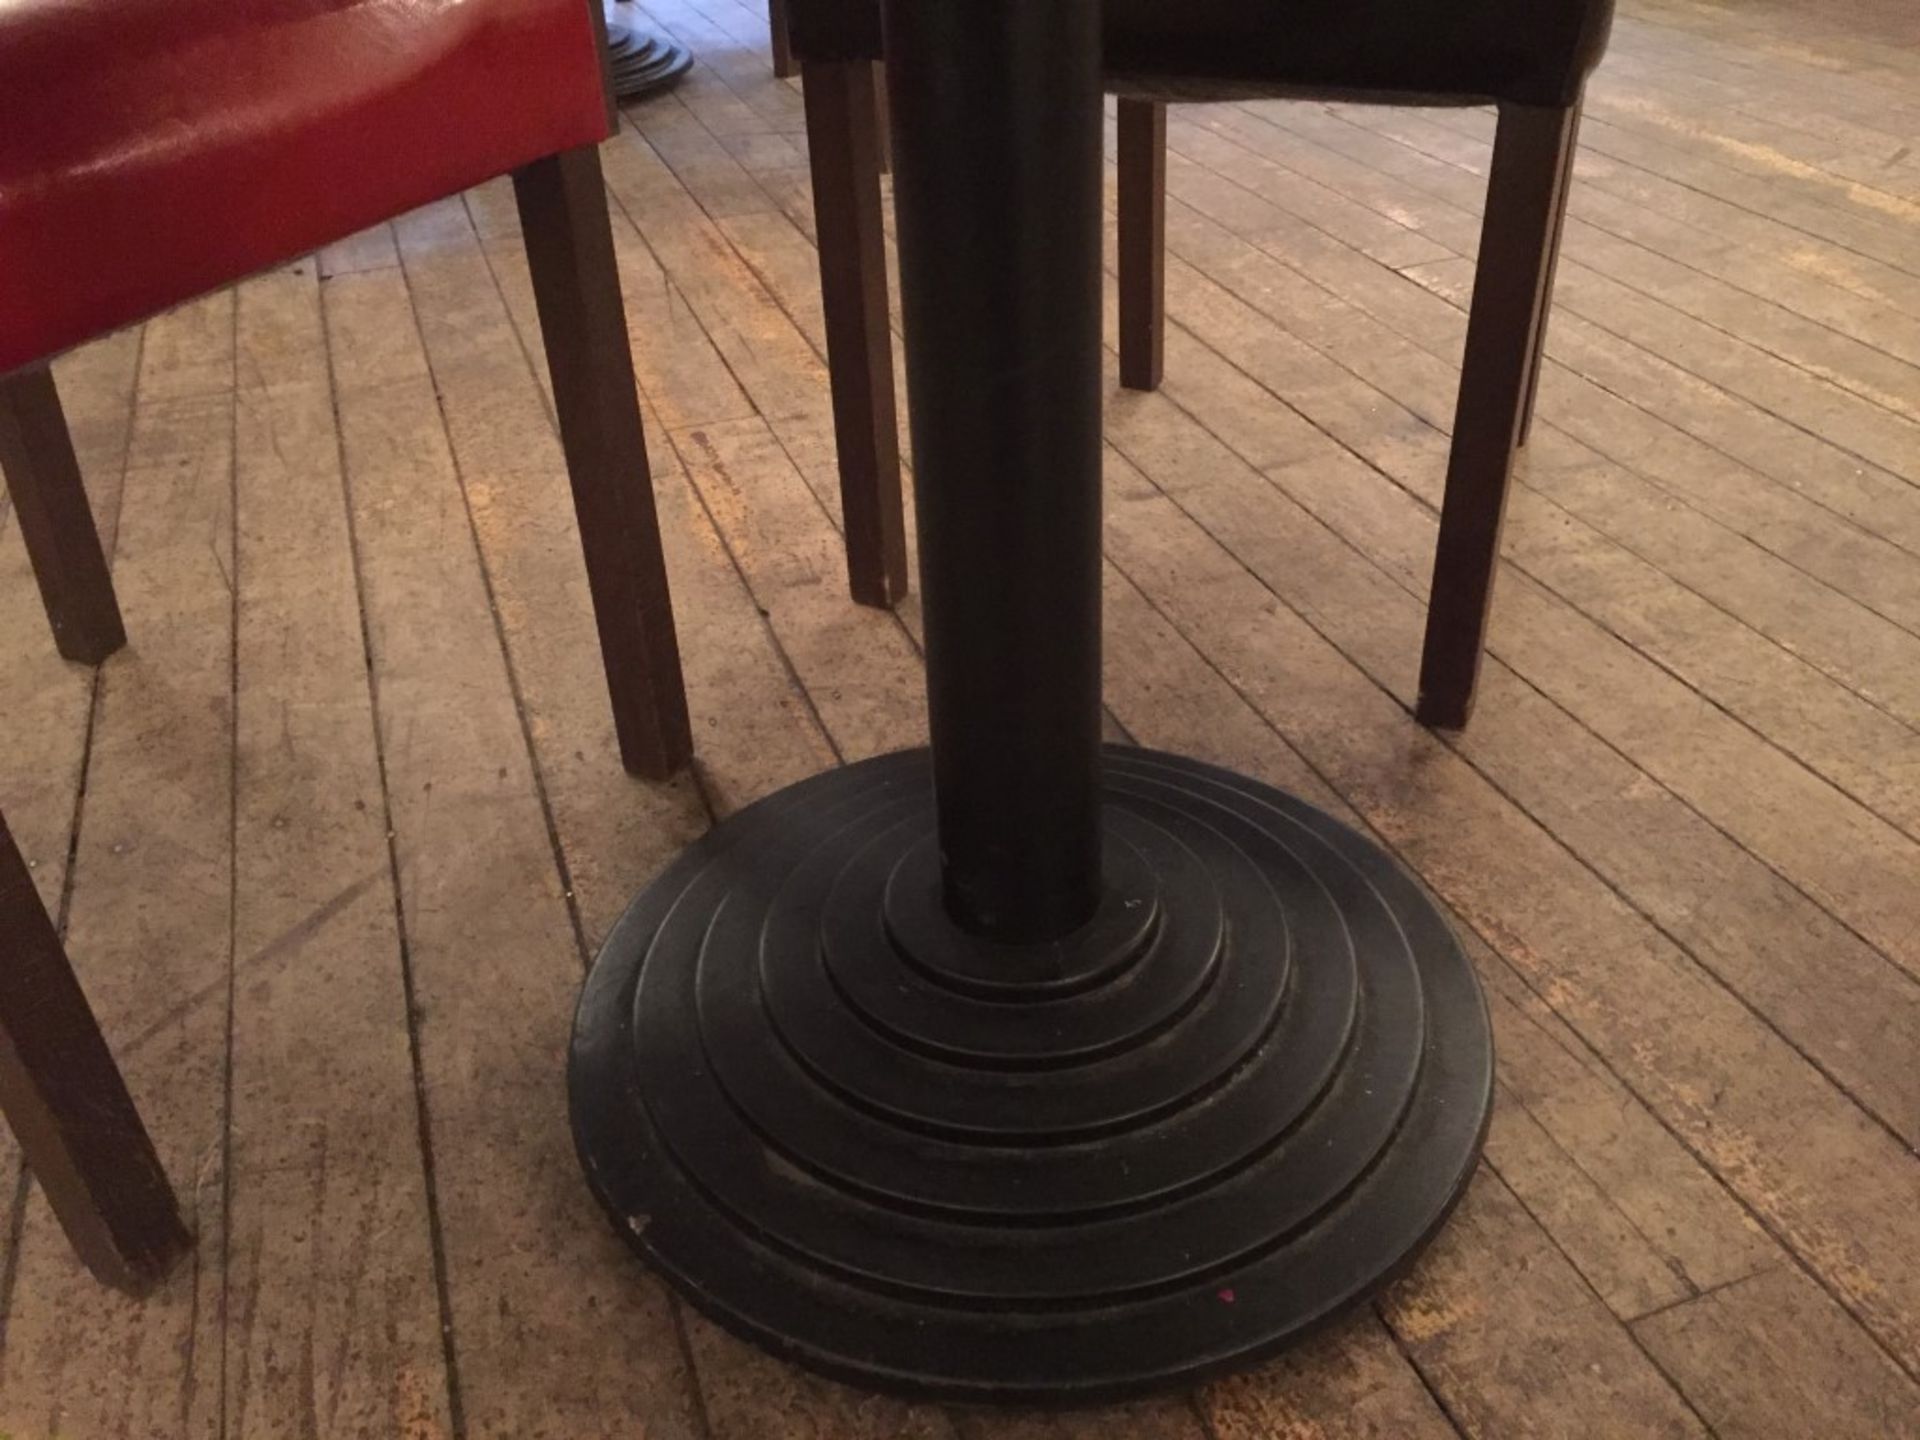 1 x Square Bistro Table - Solid Wood Table Top With Cast Iron Base - Dimensions: 90 X 90 cm, Height - Image 2 of 5